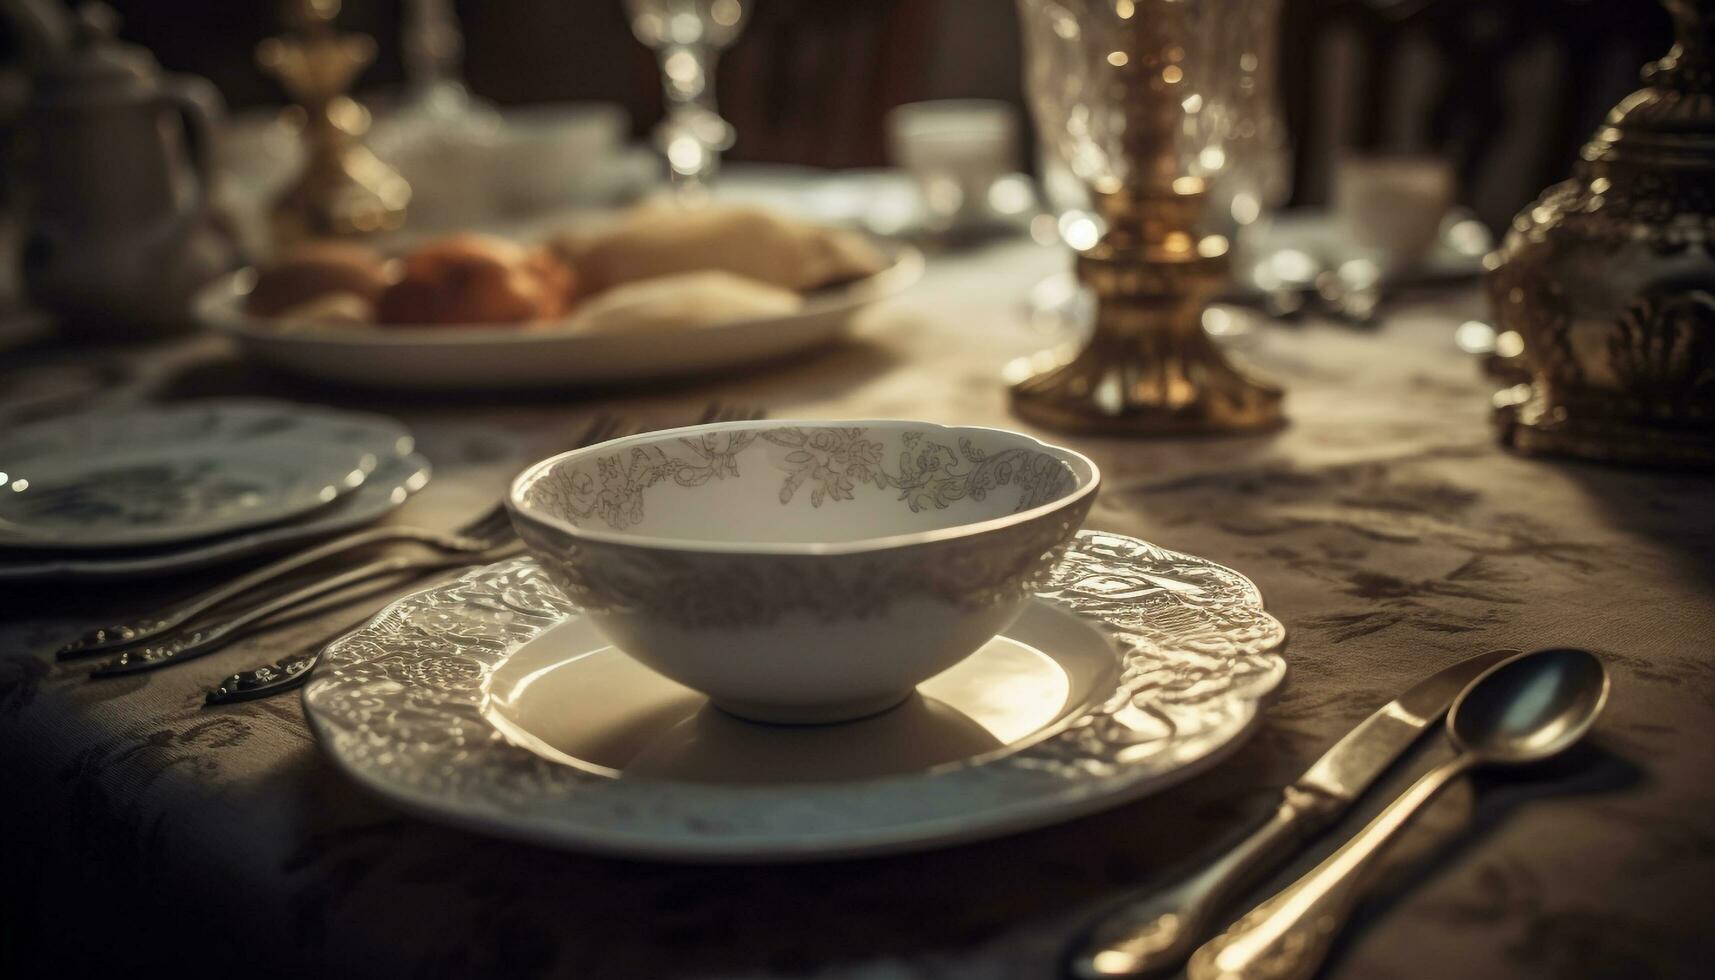 An elegant antique table with old fashioned crockery and silverware generated by AI photo